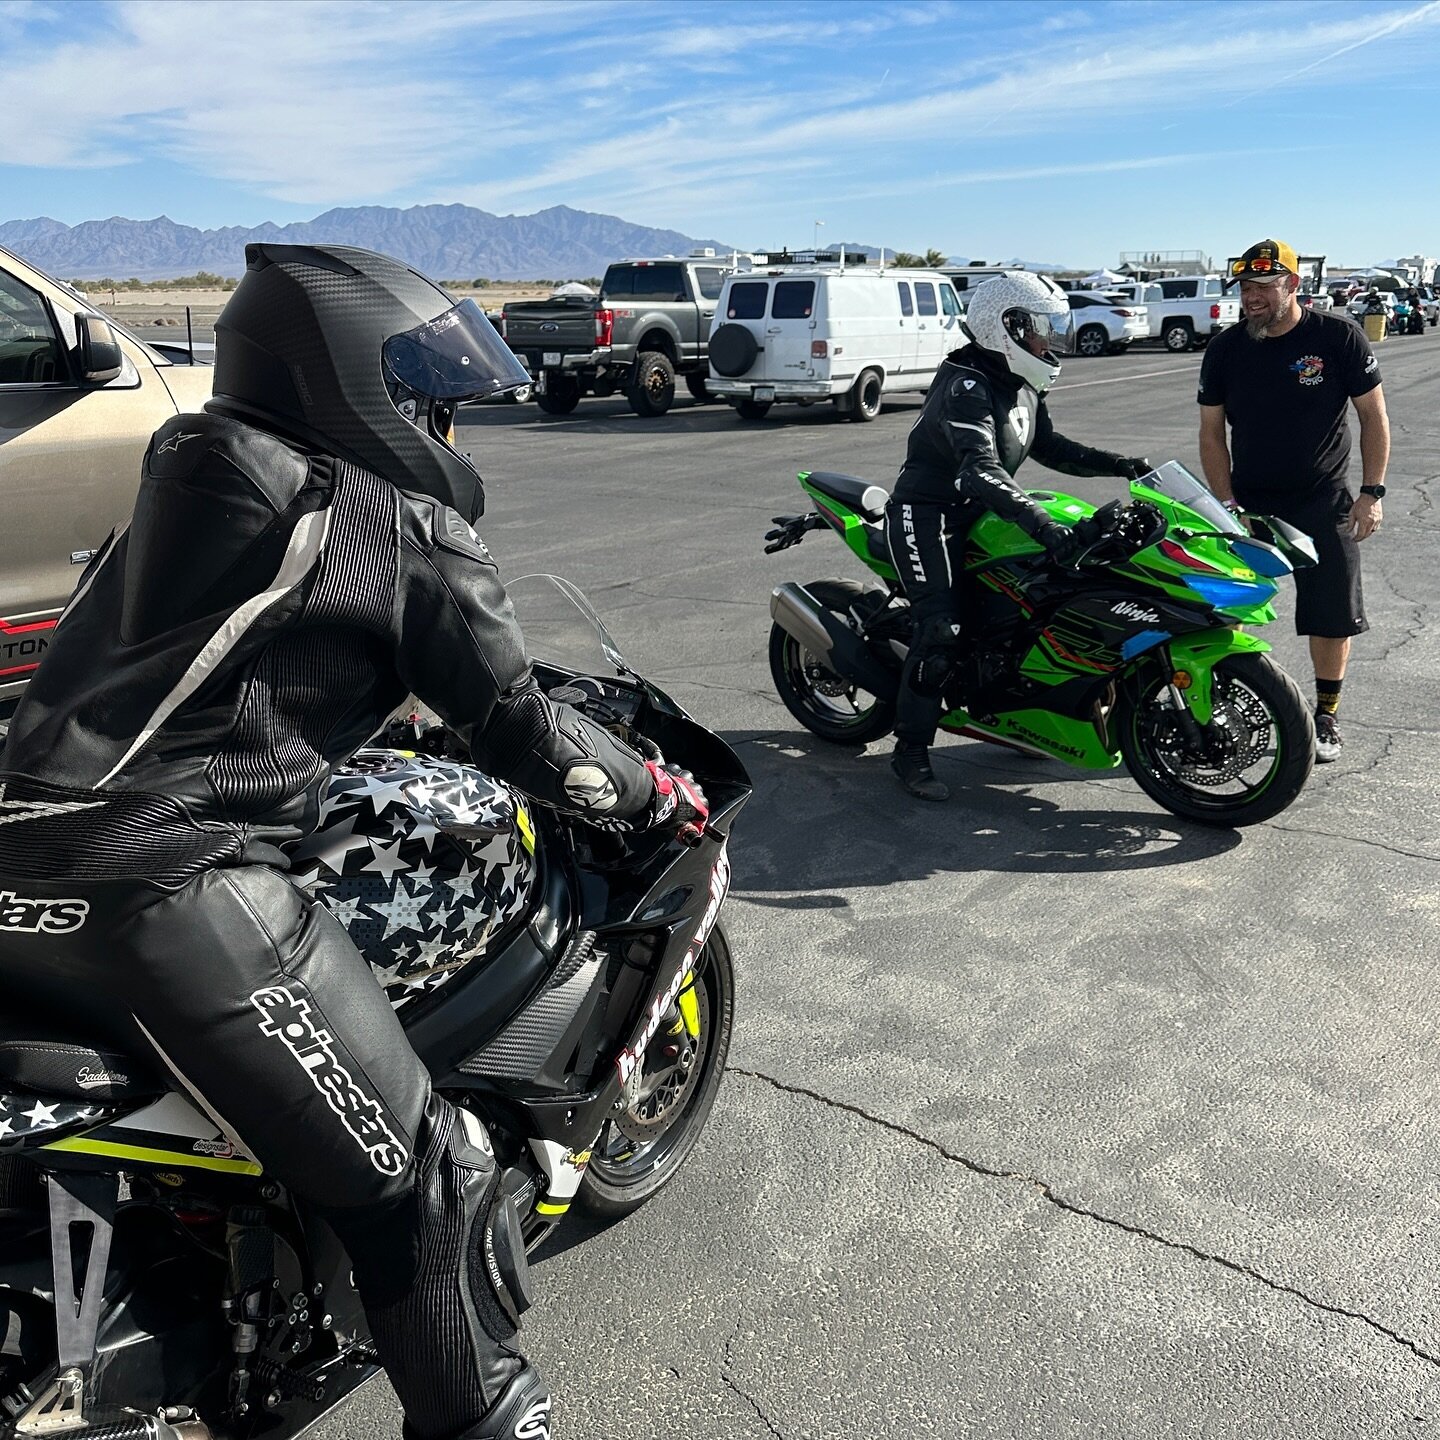 We are out here at @femmewalla with a few ladies on our rental ZX-4R, ZX-6R, and GSX-R 600! They flew in from all over the USA to enjoy a beautiful day in the California sun. 🌞 

#RideHVMC #Femmewalla #BikeRentals #TrackDay